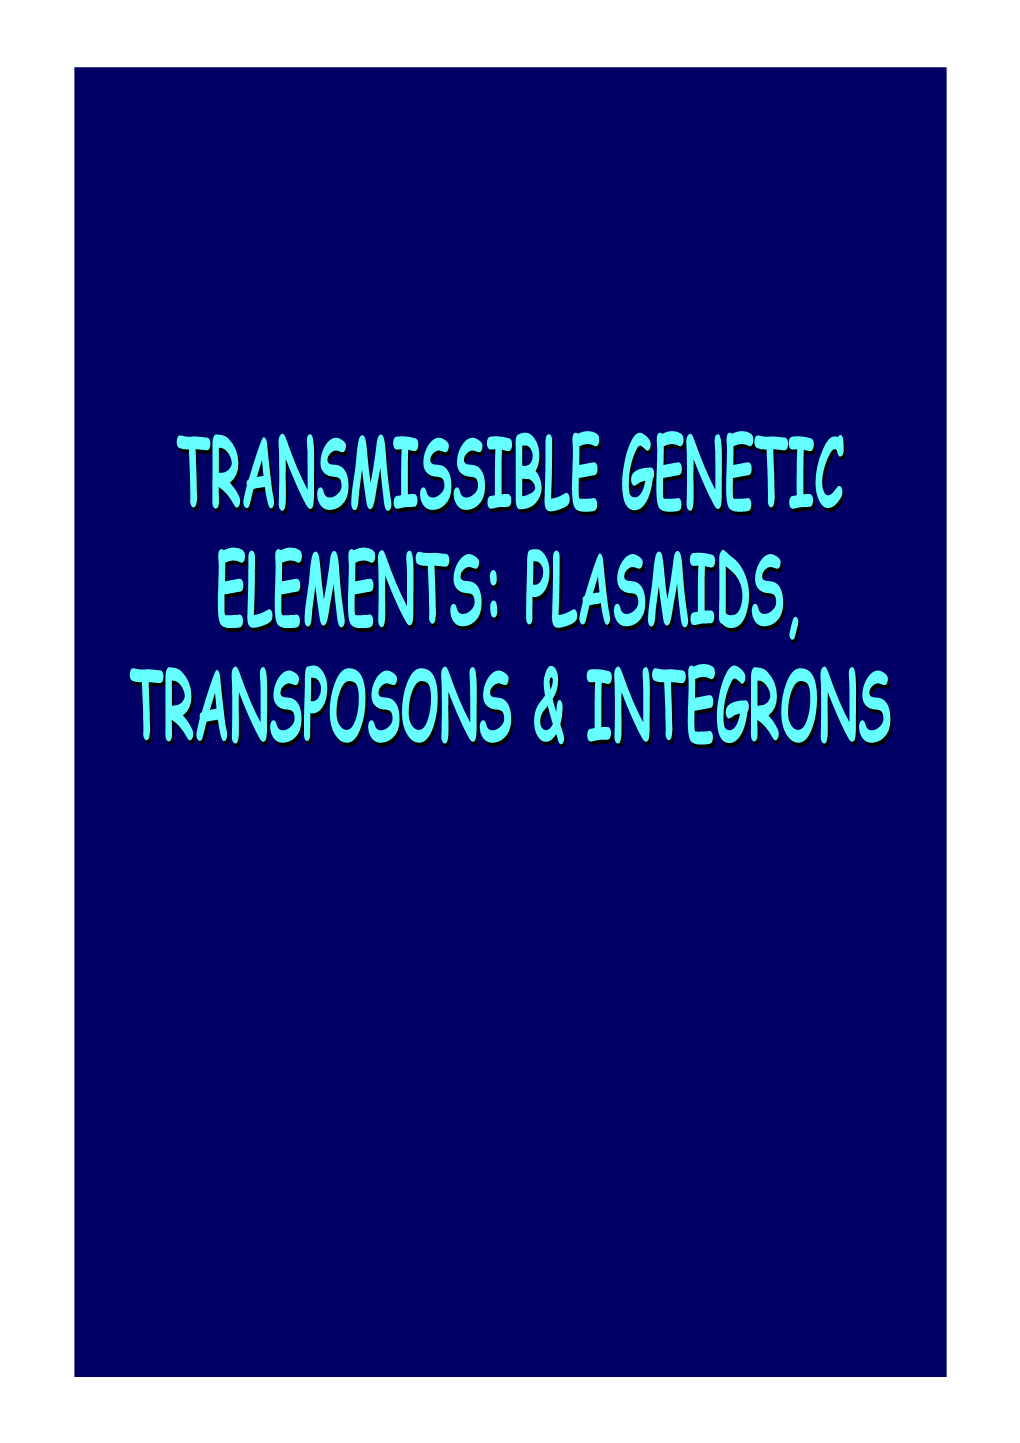 Chapter 8. Transmissible Genetic Elements. Plasmids, Transposons and Integrons